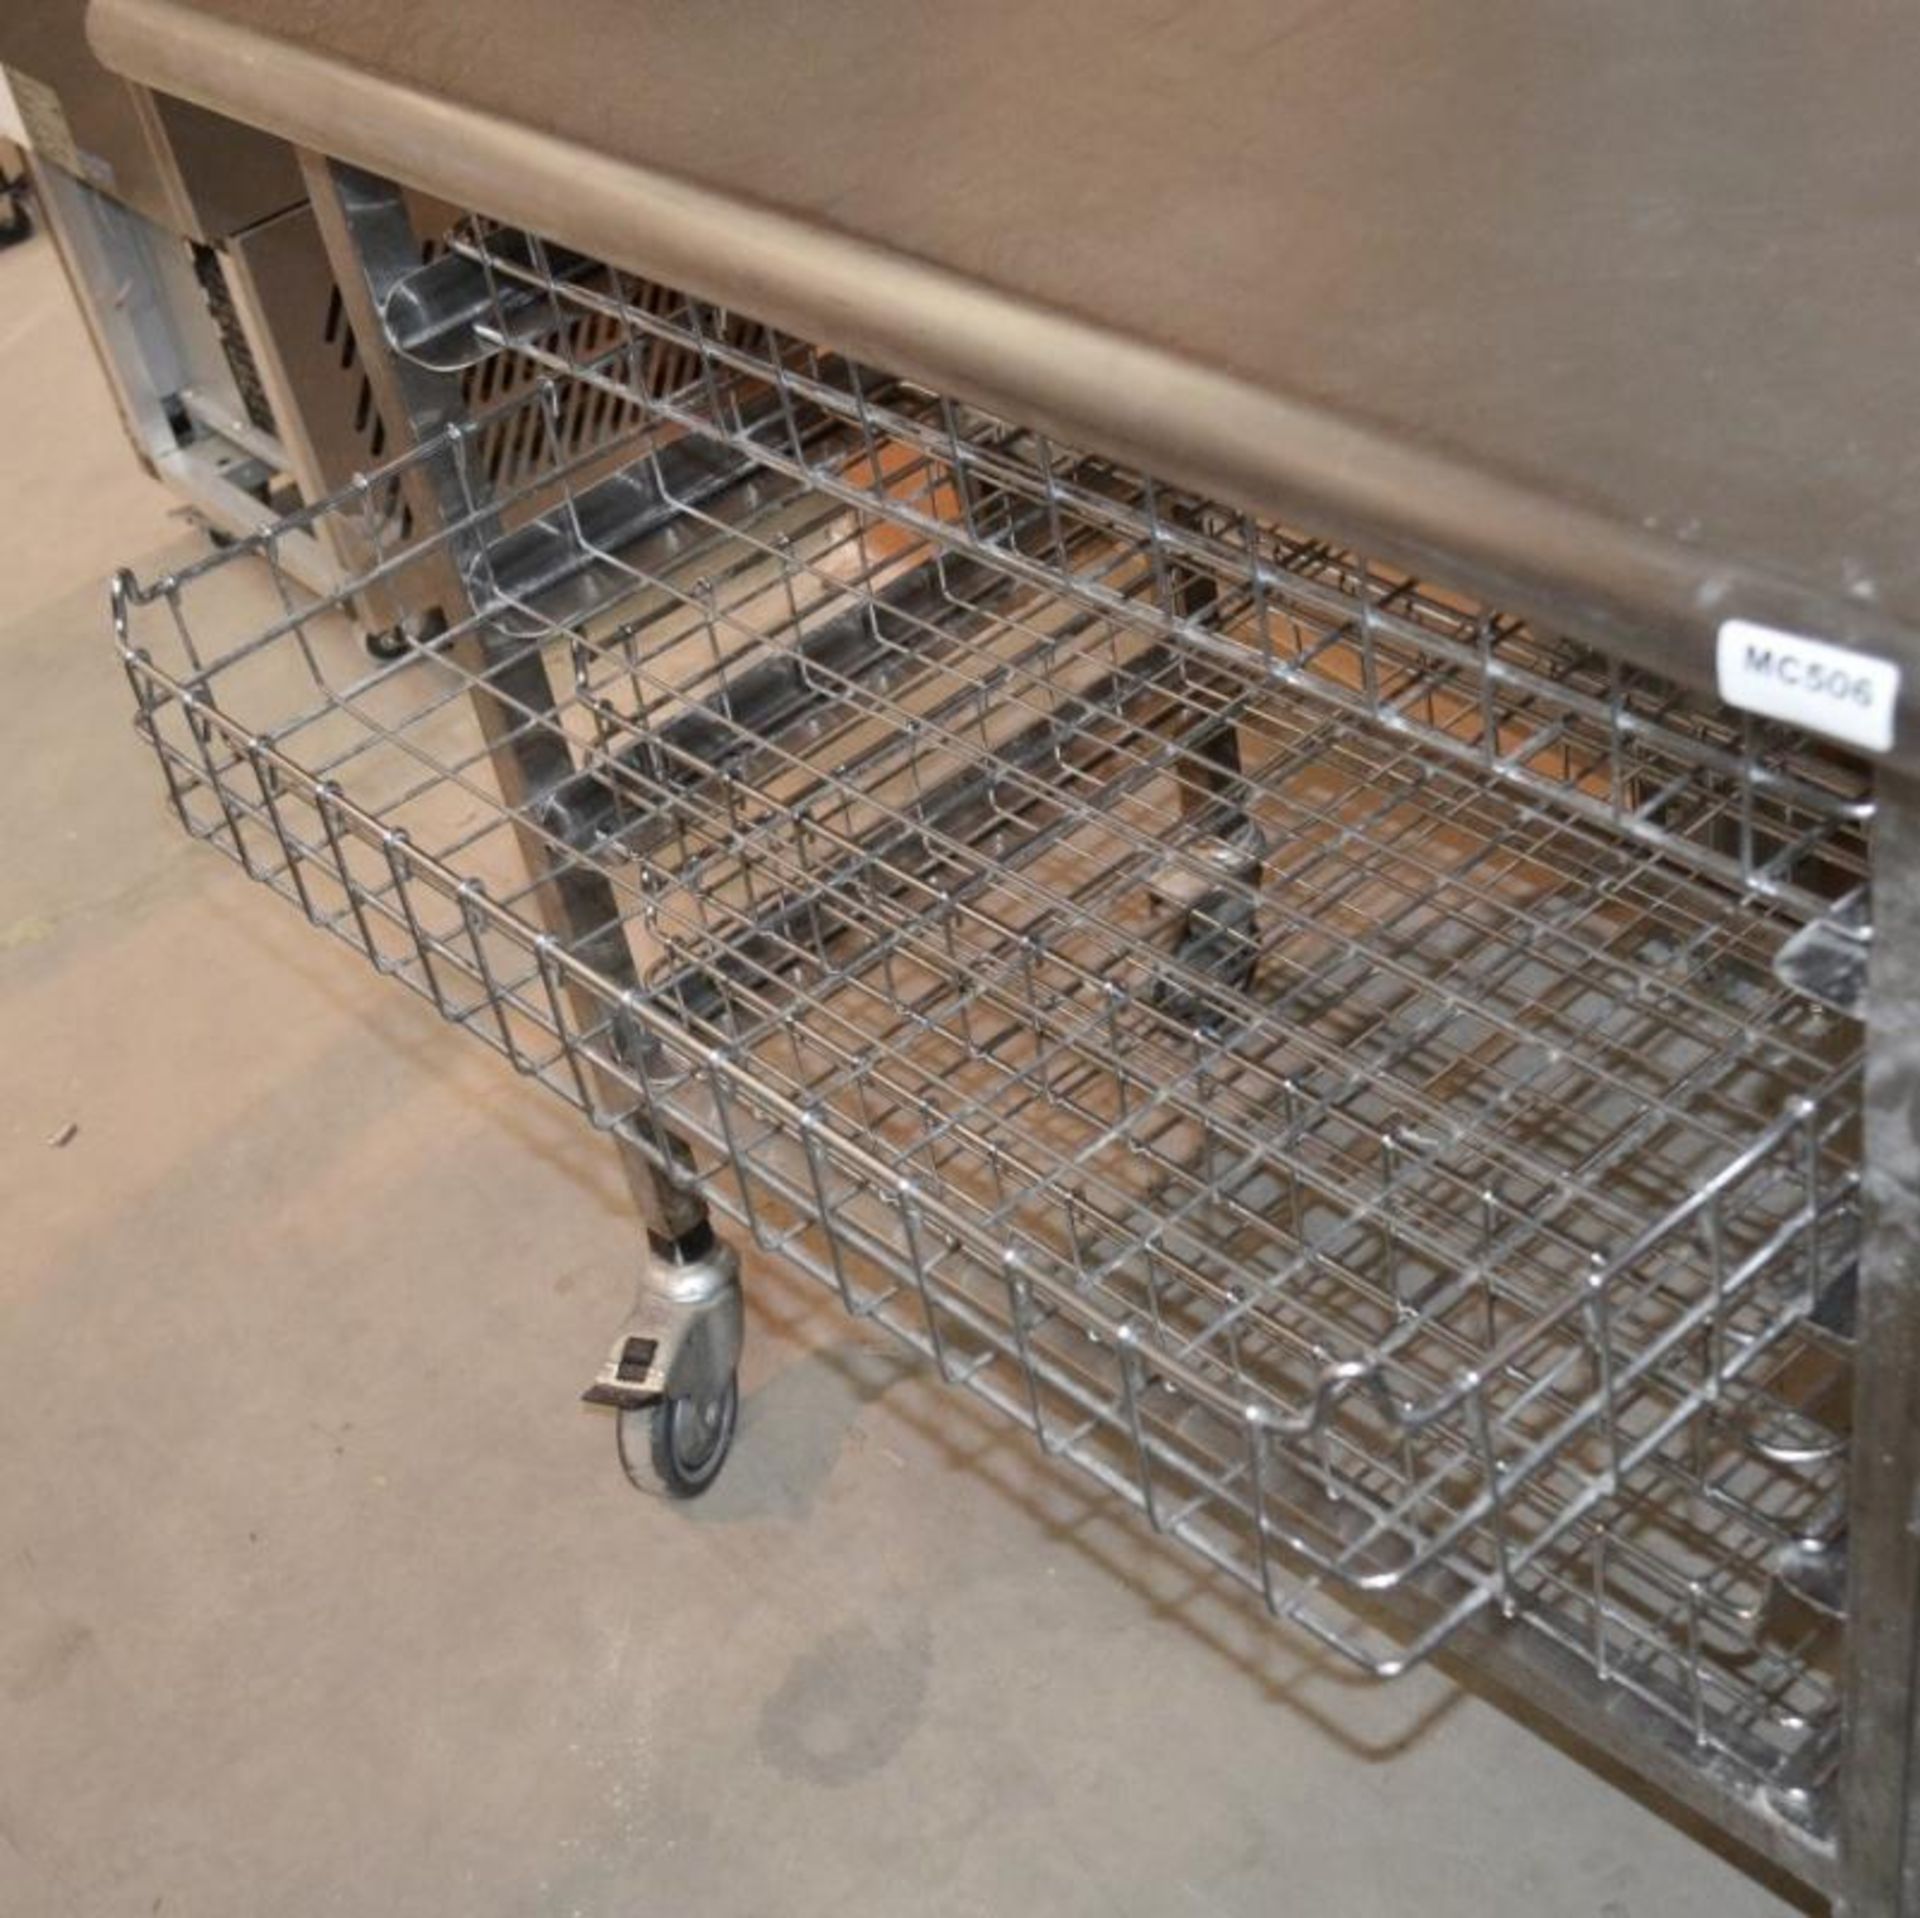 1 x Stainless Steel Commercial Kitchen 4-Basket Trolley On Castors - Dimensions: W90.5 x D60 x H88cm - Image 4 of 4